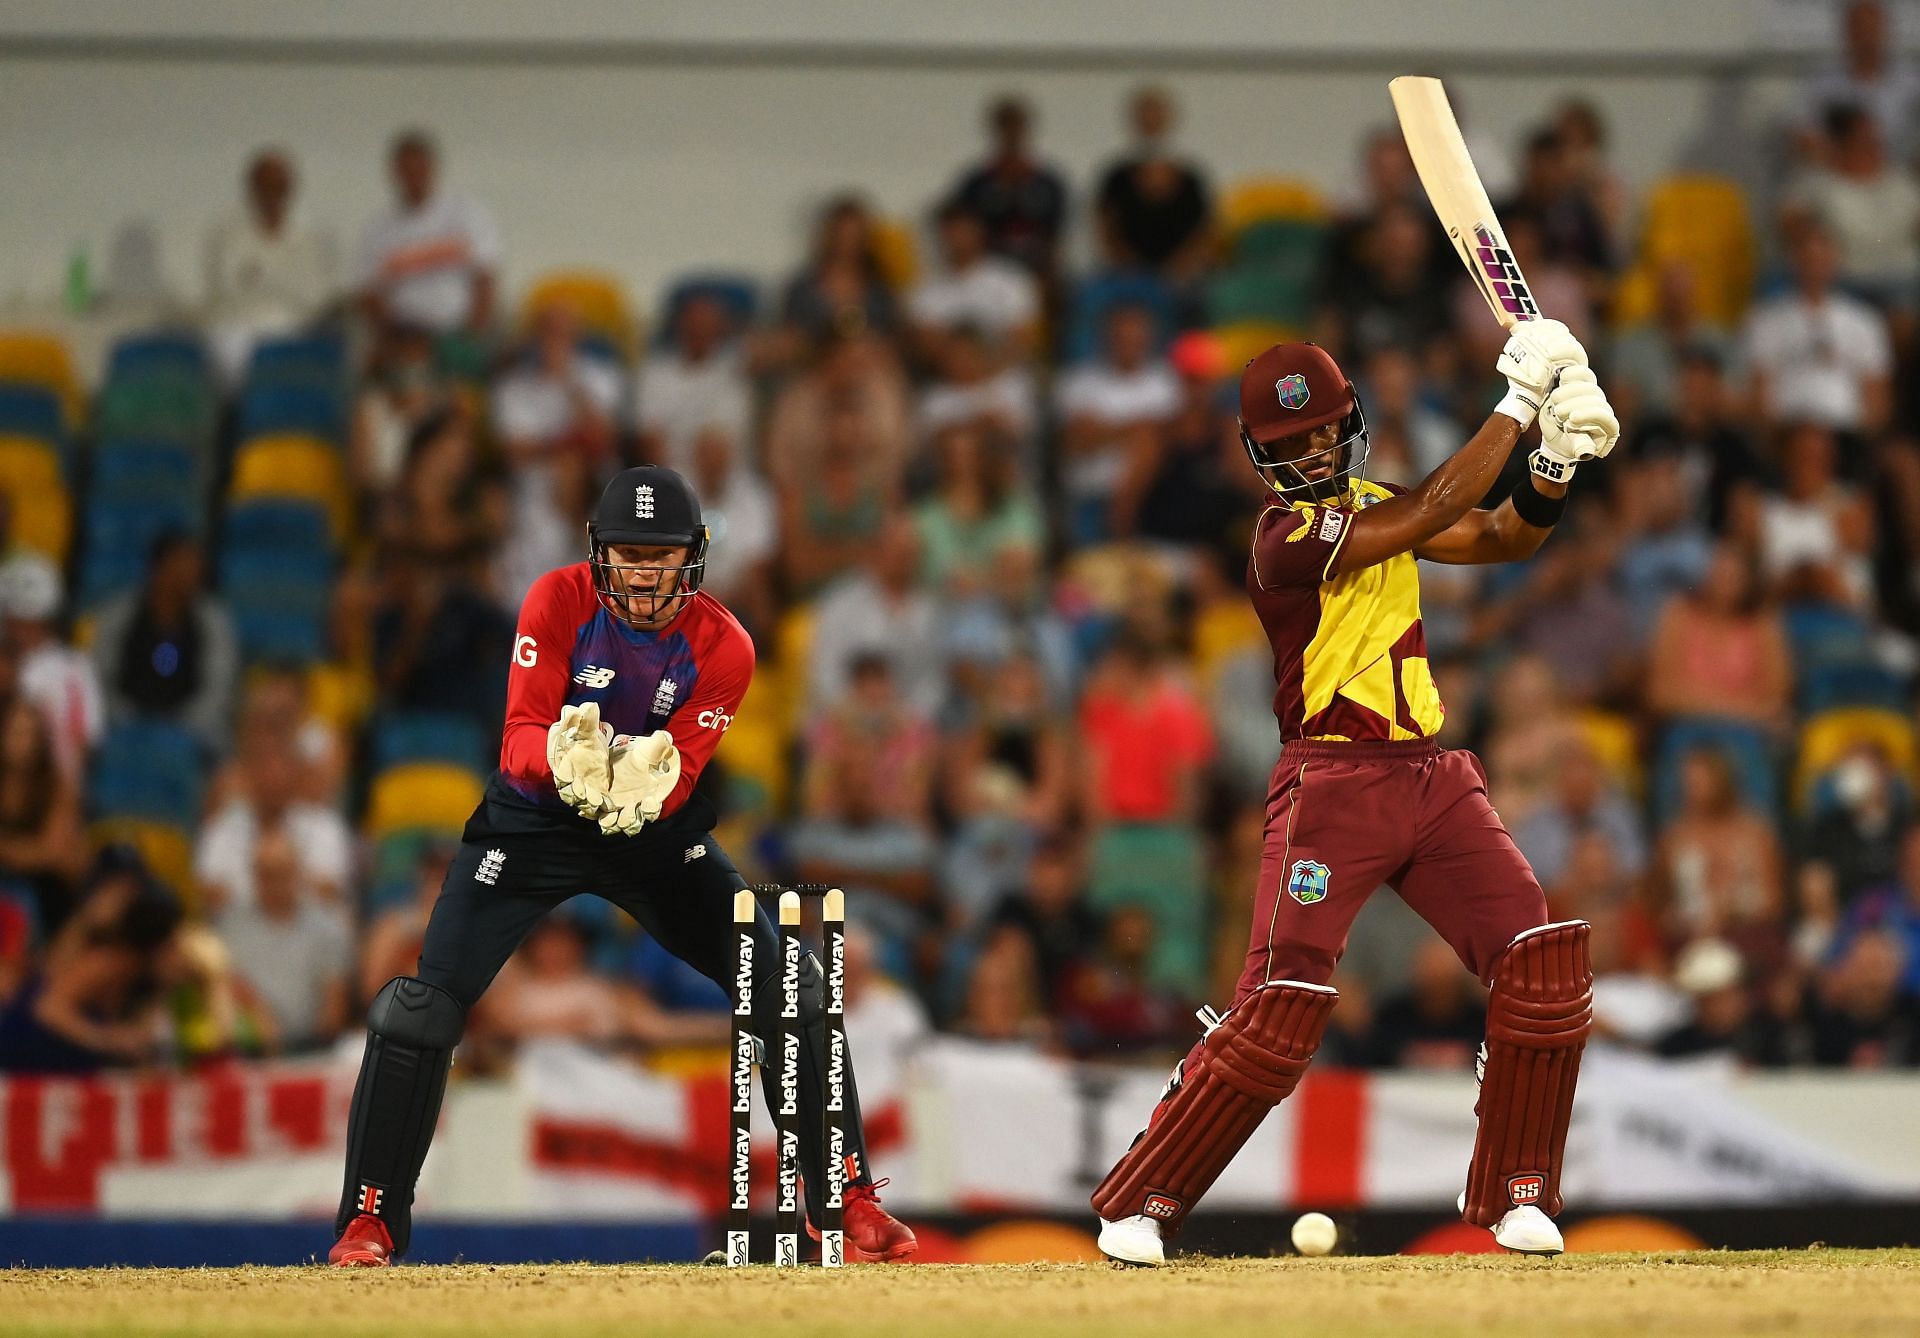 West Indies vs England - T20 International Series First T20I